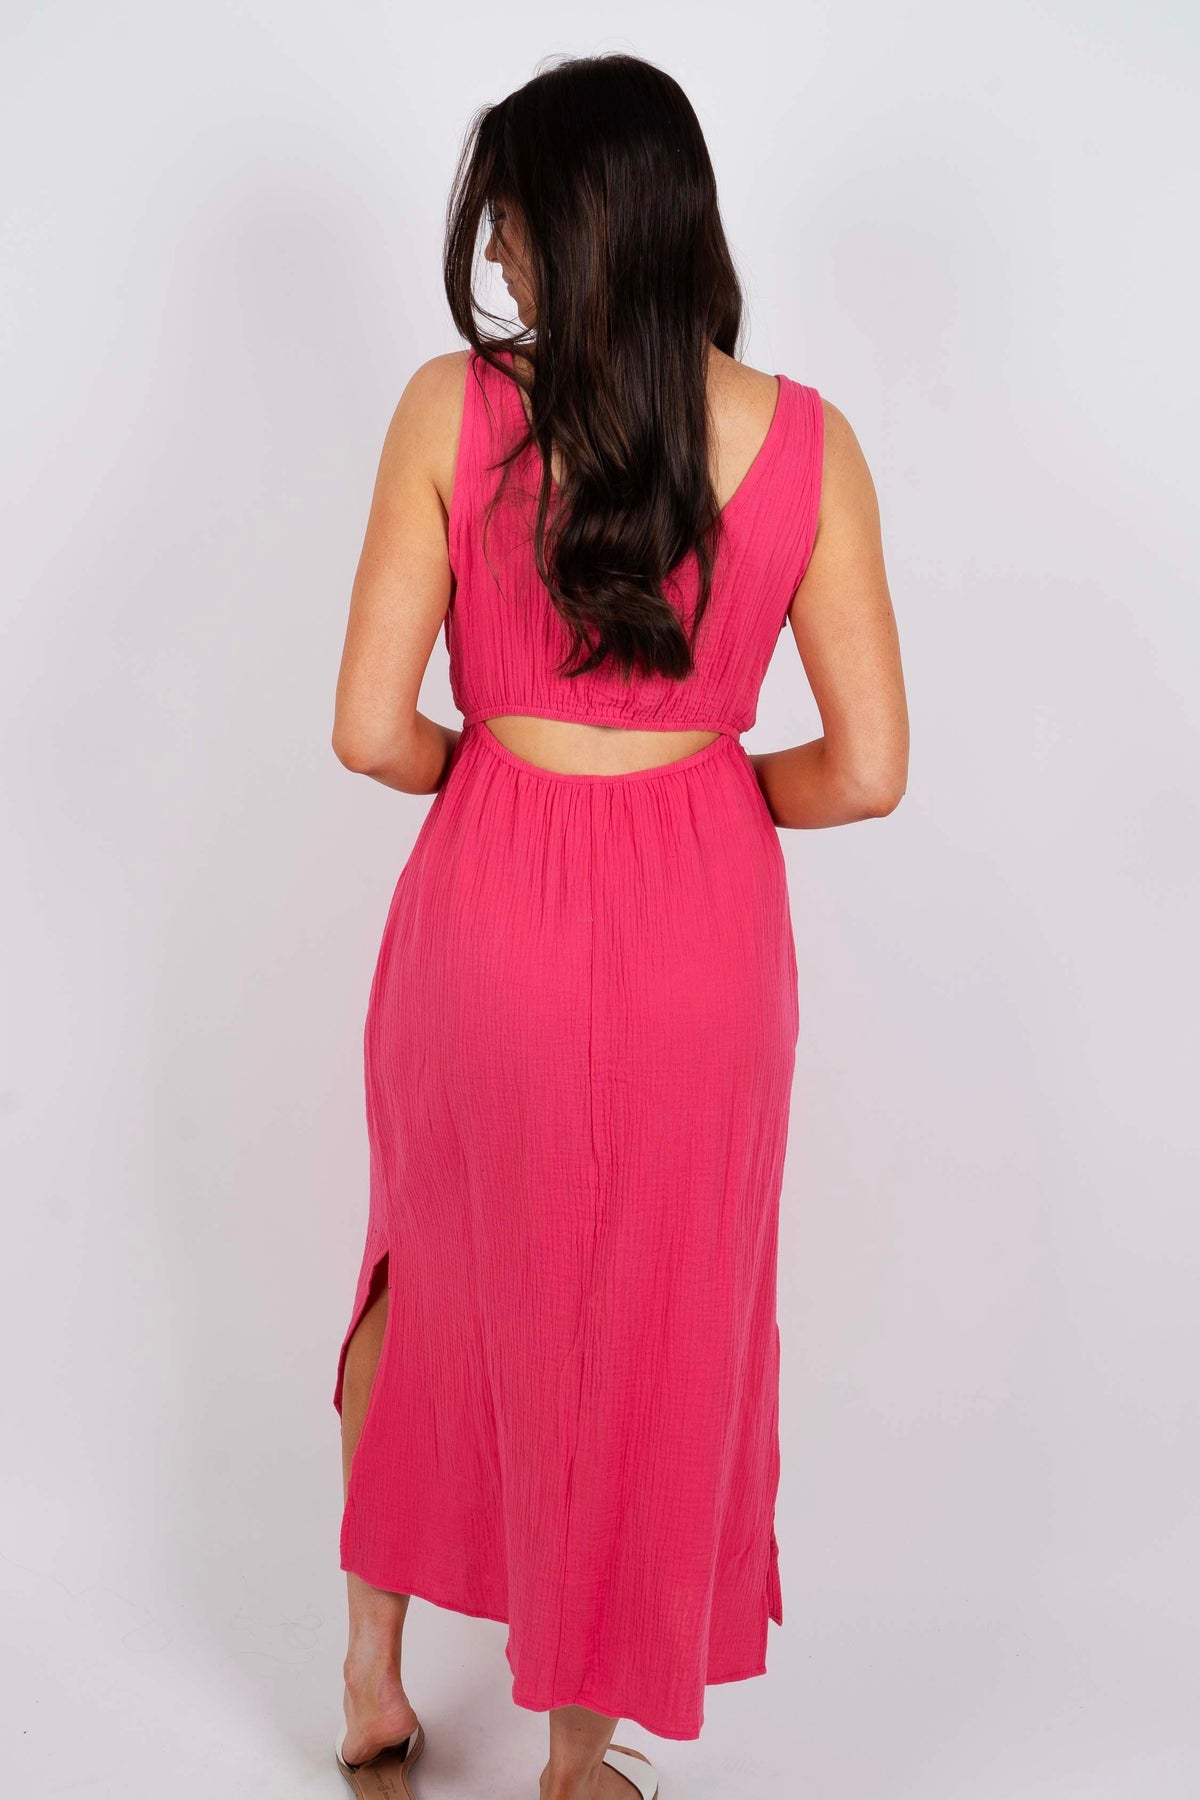 Only In My Heart Dress (Hot Pink)